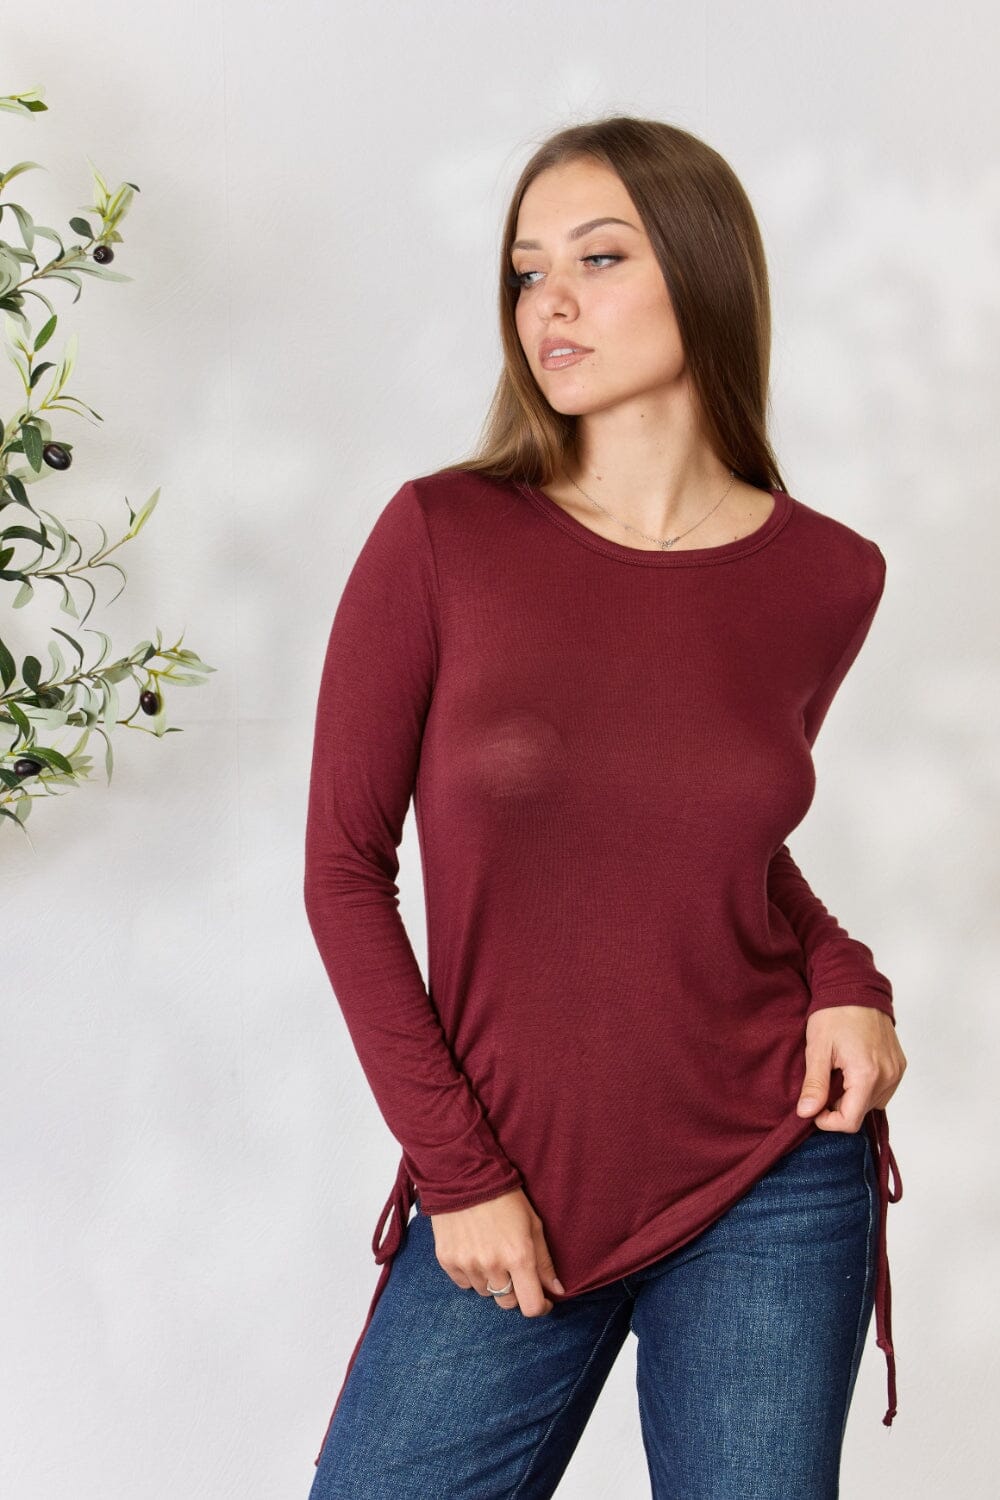 Culture Code Wine Red Drawstring Round Neck Long Sleeve Top Shirts & Tops jehouze 